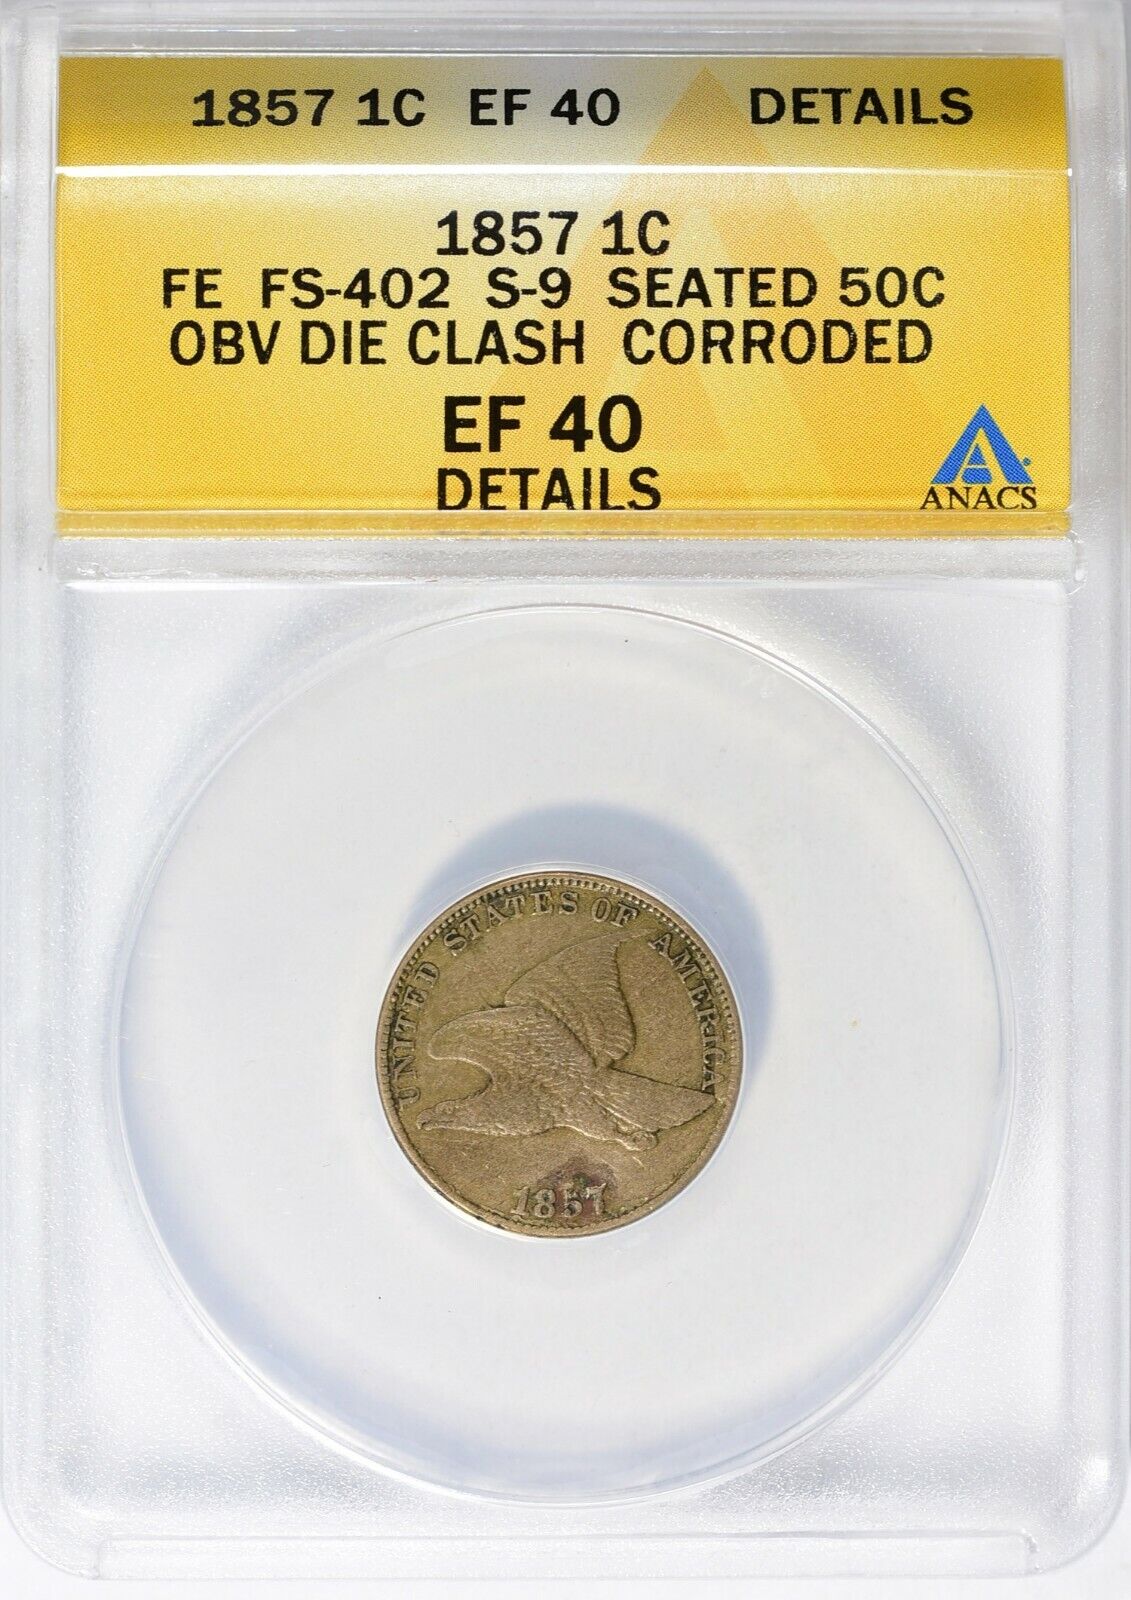 1857 Flying Eagle Penny S-9 50c Obv Die Clash Anacs Xf-40 Details